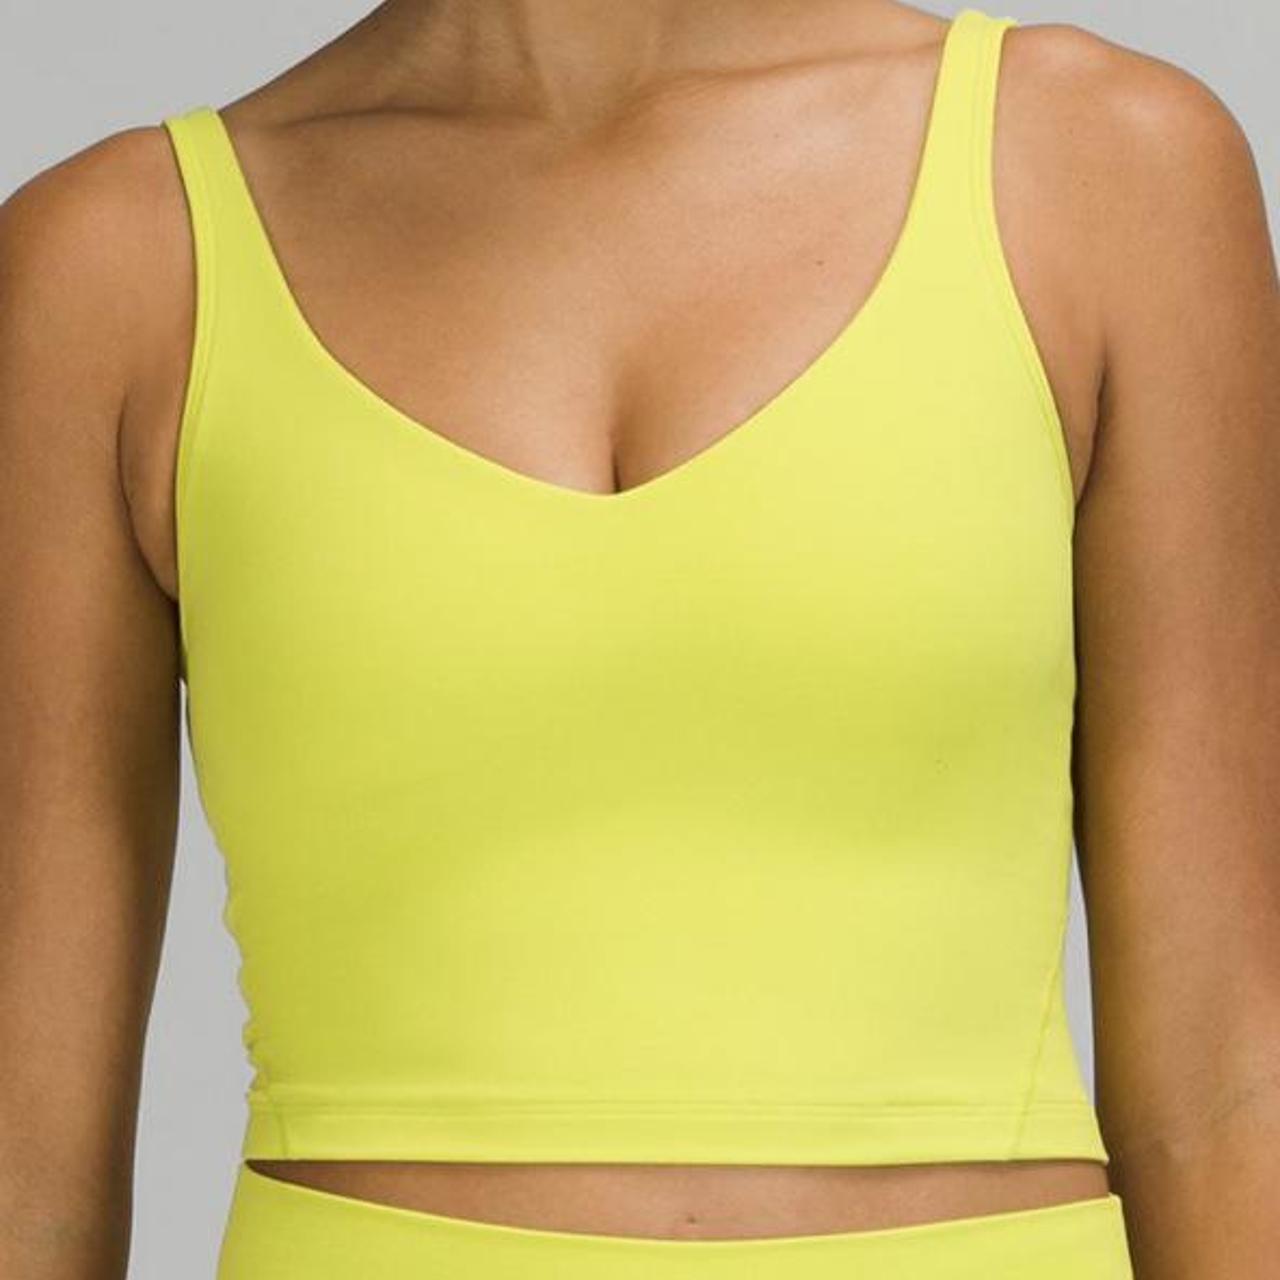 Lululemon Align Tank in Yellow Pear Size 10 - $45 - From Carli